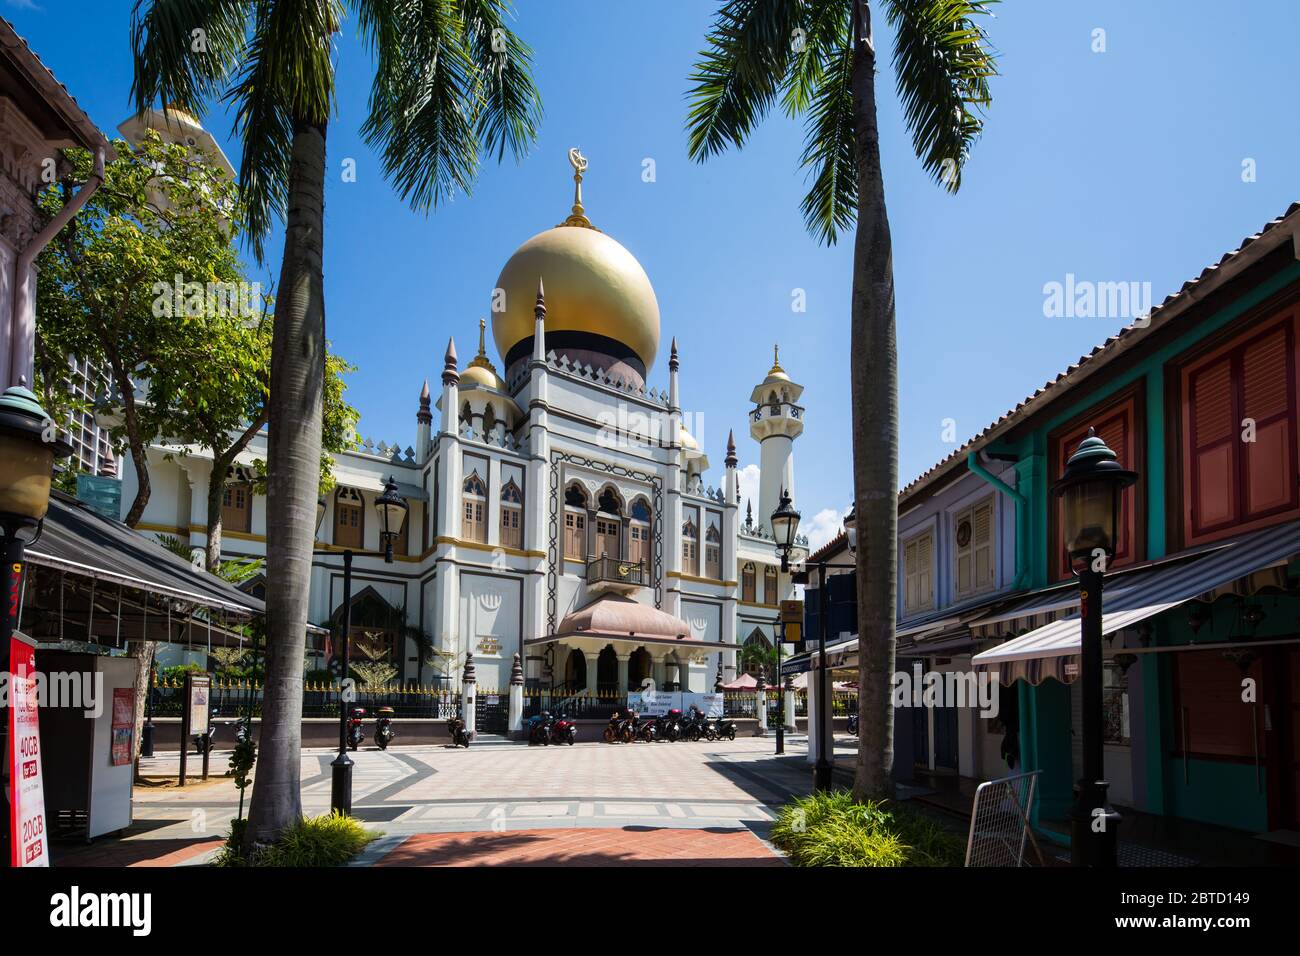 Because of Covid-19. Sultan Mosque is temporarily shut down and also the F&B business in the surrounding area. Kampong Glam, Singapore Stock Photo